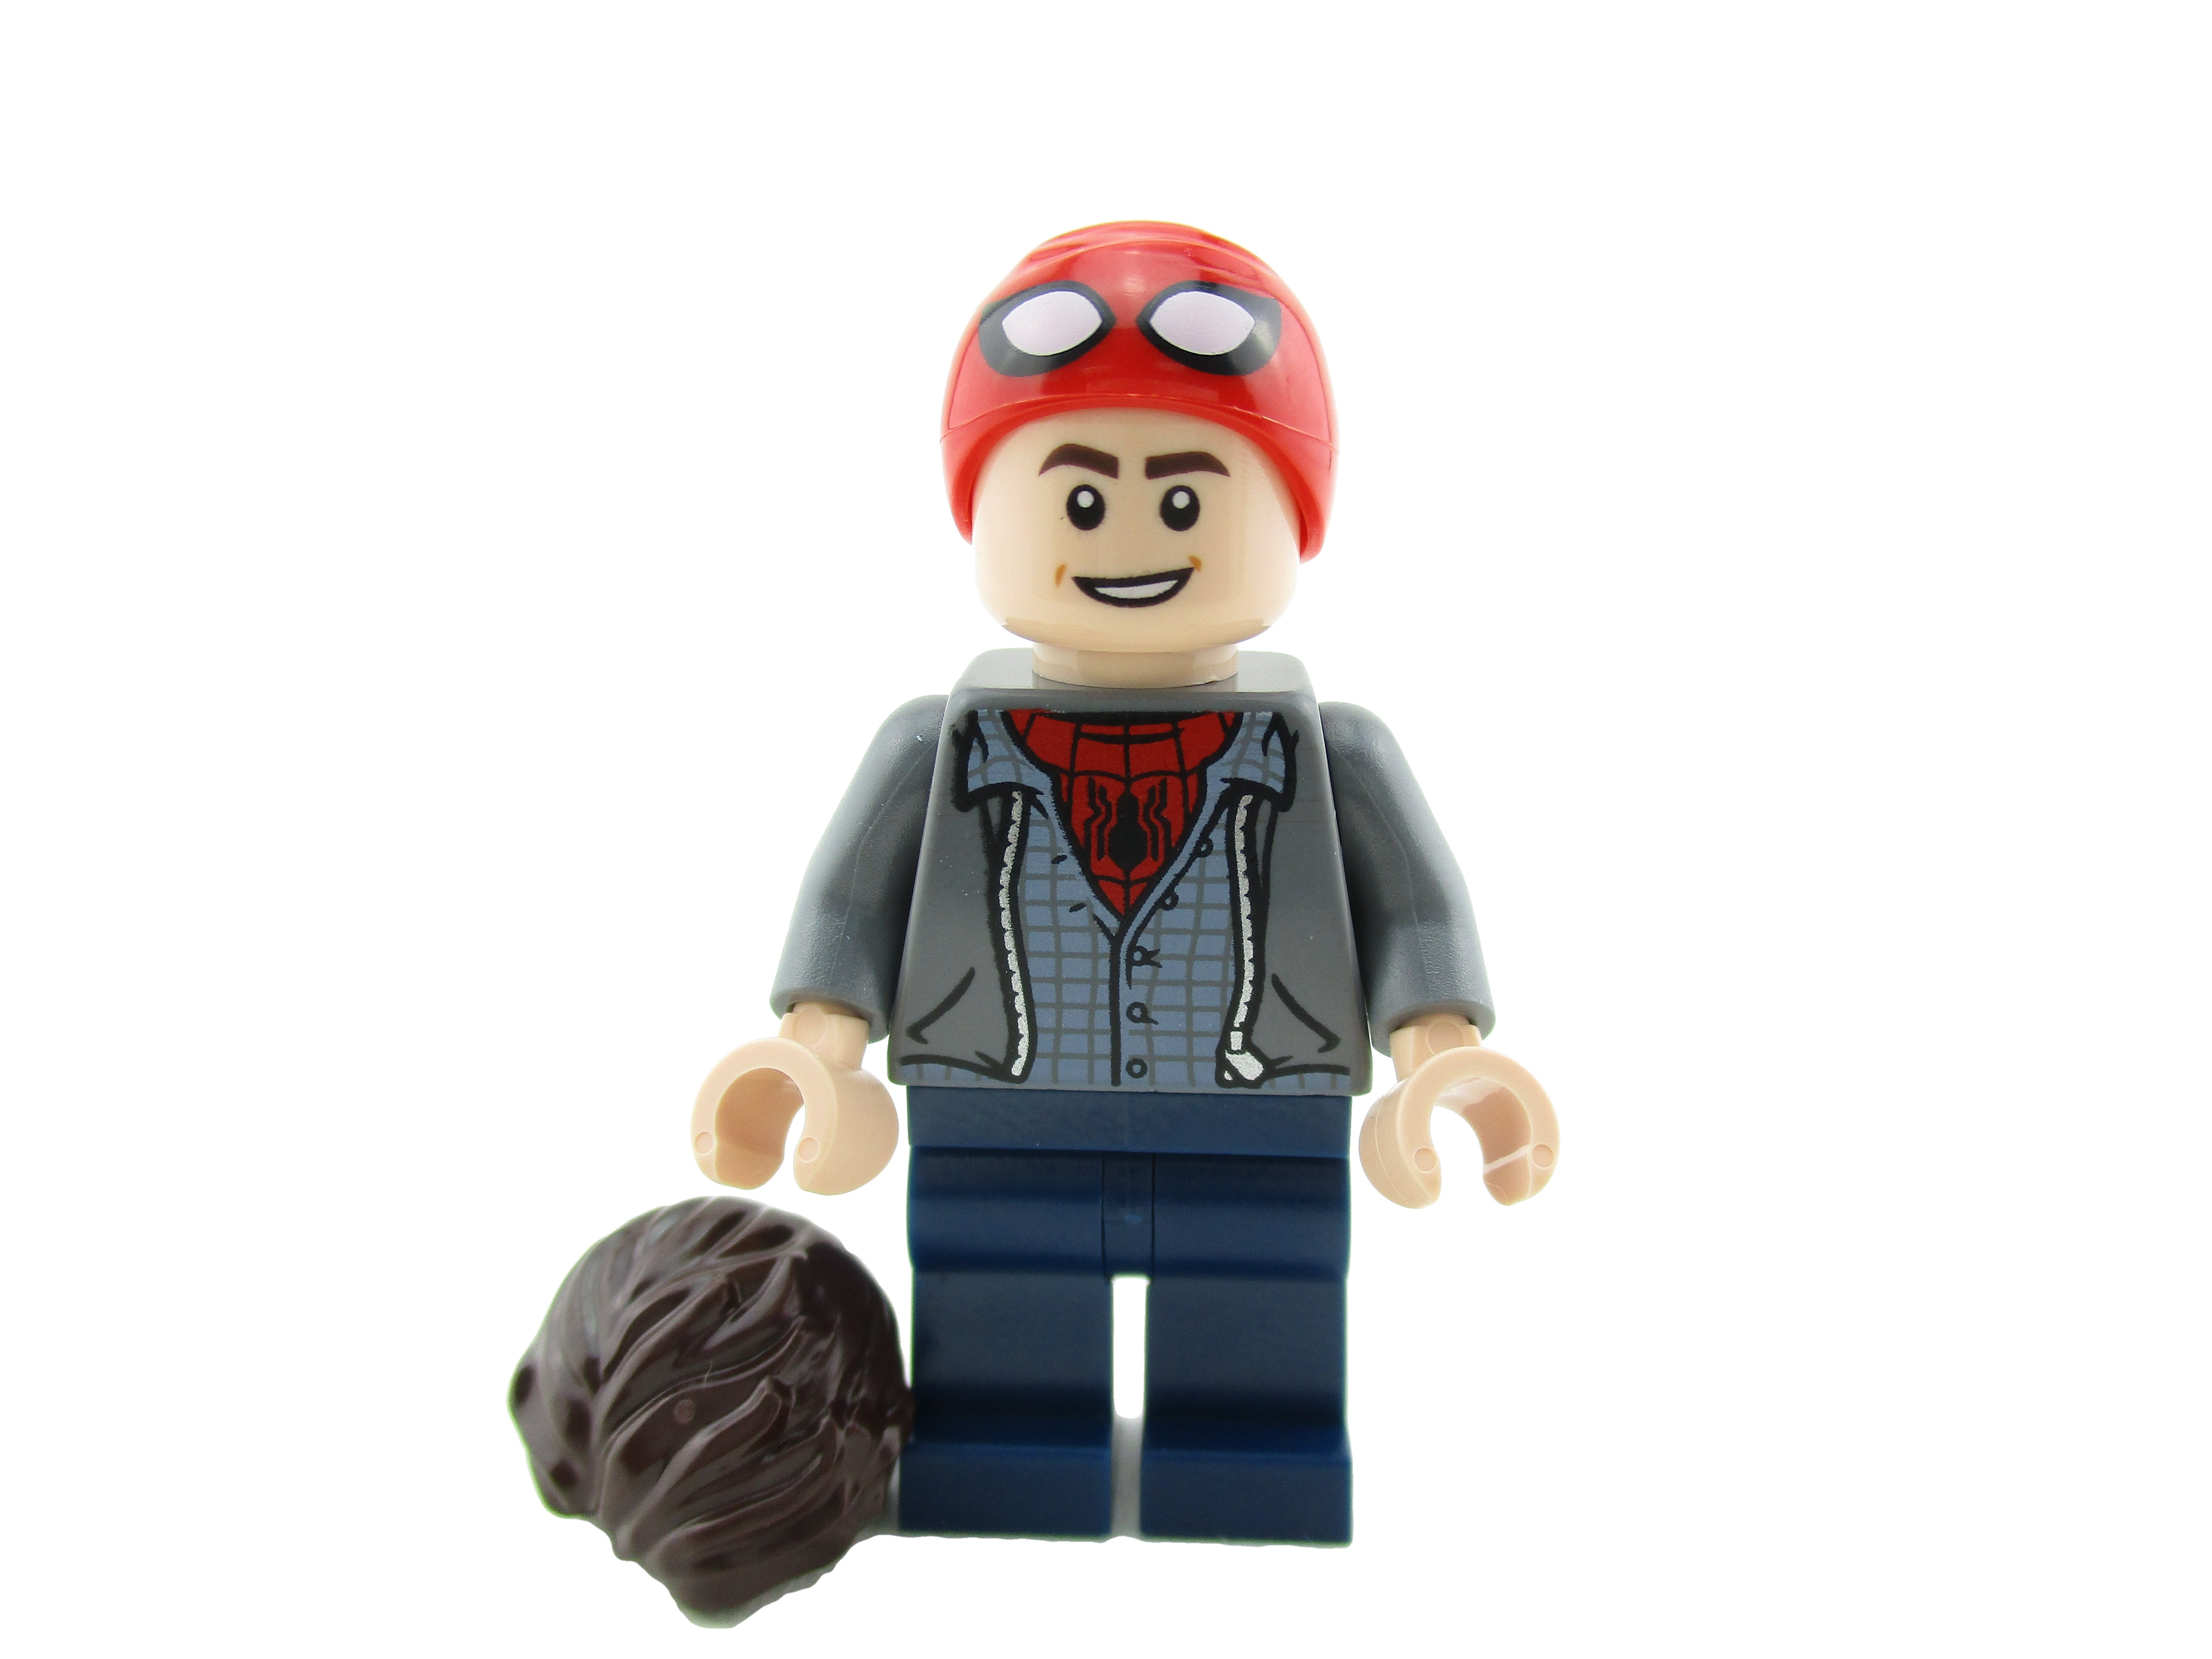 lego spider man far from home 76129